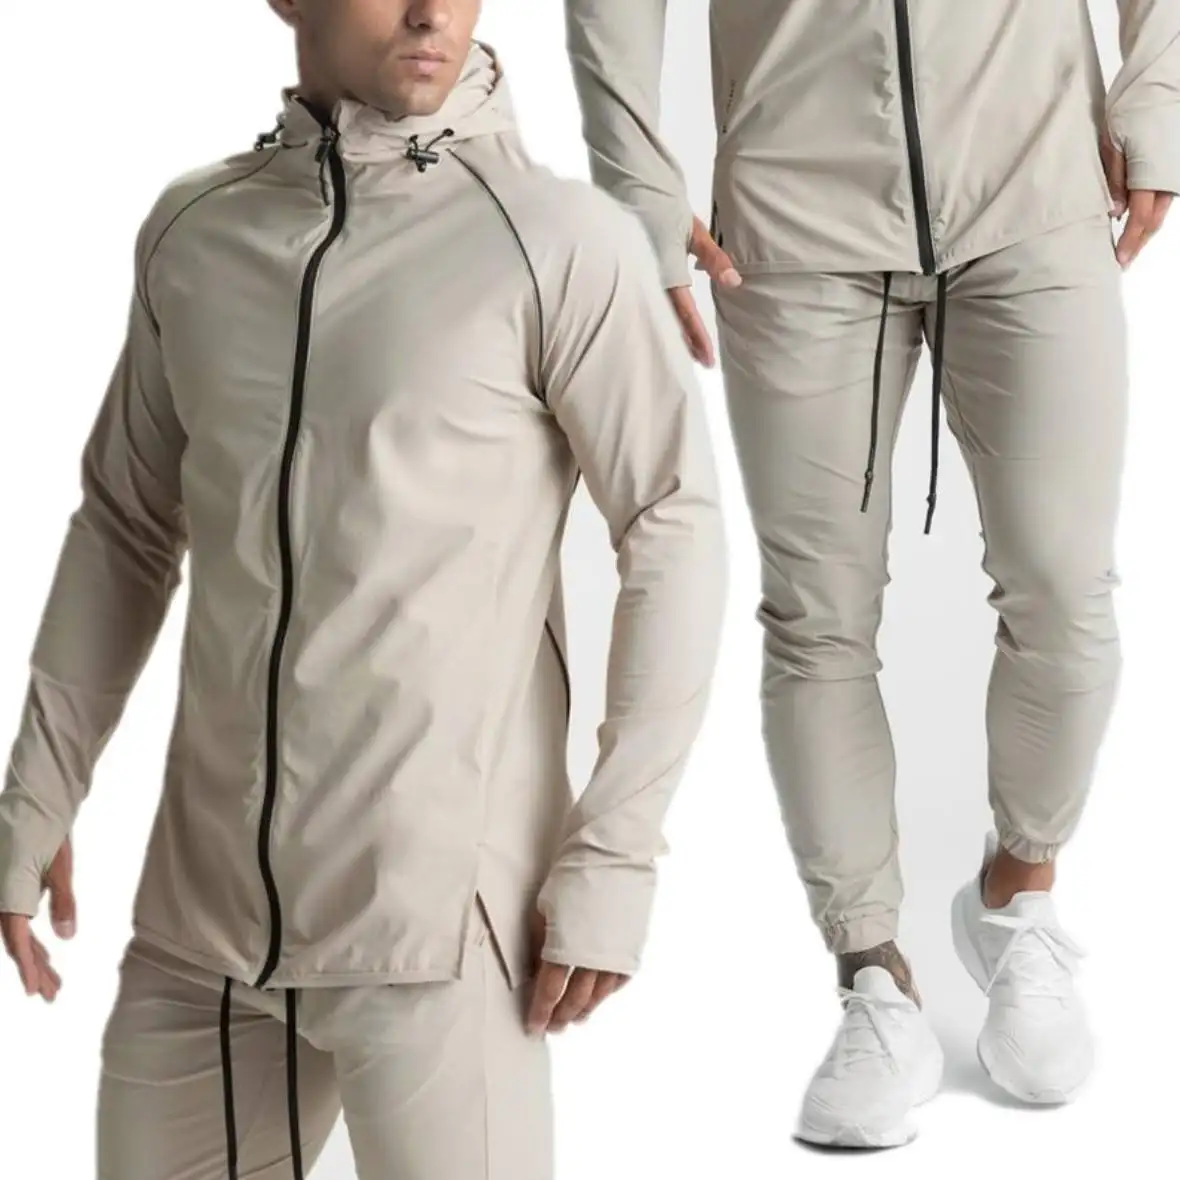 RTS Fall Sports Suit Outfits High Quality Comfortable Plain Joggers Suits Zipper up Training Sports Wear Tracksuits For Men